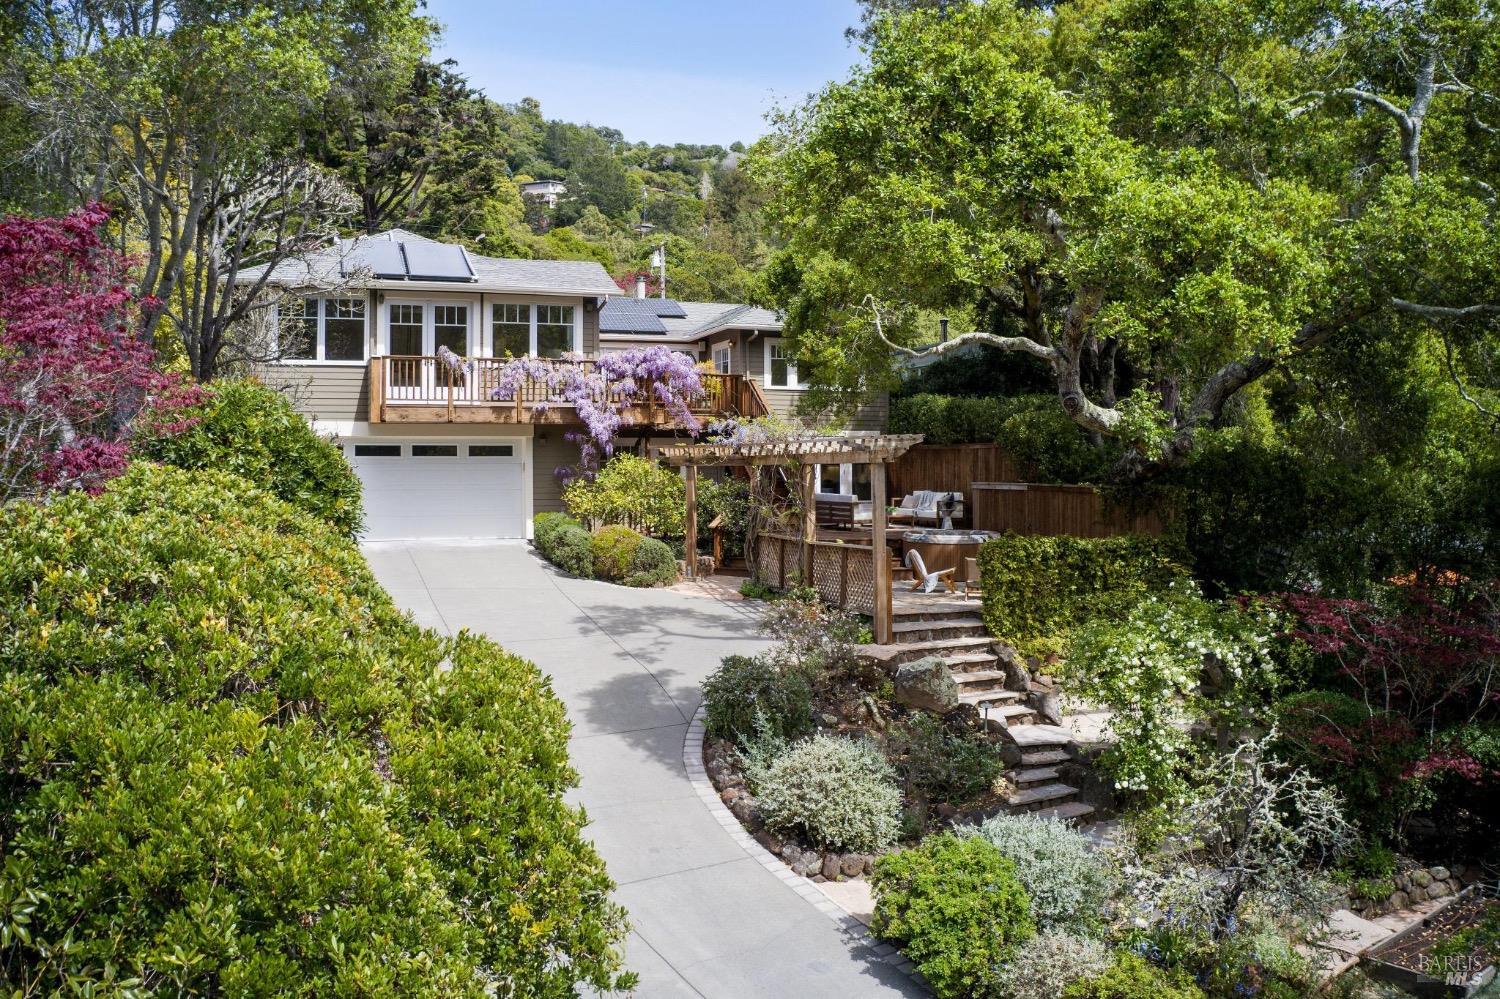 This retreat like home in the prestigious Blithedale Canyon neighborhood of Mill Valley is enveloped by flourishing gardens and just a short walk to downtown. Bathed in natural sunlight, with 5 beds, 4 baths, office and bonus room home, offering a perfect family friendly floorplan. Spacious primary + 2 additional beds on the main level and 2 beds, plus office and bonus room down. Large living room with vaulted ceilings, frplc and French doors open to the large entertaining deck, overlooking the garden and blooming wisteria beyond. Grand Chef's kitchen with granite counters, spacious center-island, s/steel appliances and high-end cabinetry. Office with abundant built-ins and bonus room, perfect for home movies, playroom, or exercise room. Separate laundry room. All bedrooms have large closets with built ins. Large storage room. Gated entrance off Portola Lane, driveway parking for 4 + cars, as well as 2 car garage and electric car charger. Large back garden with multiple sitting and lounging areas, hot-tub and flat areas for veggie gardening.